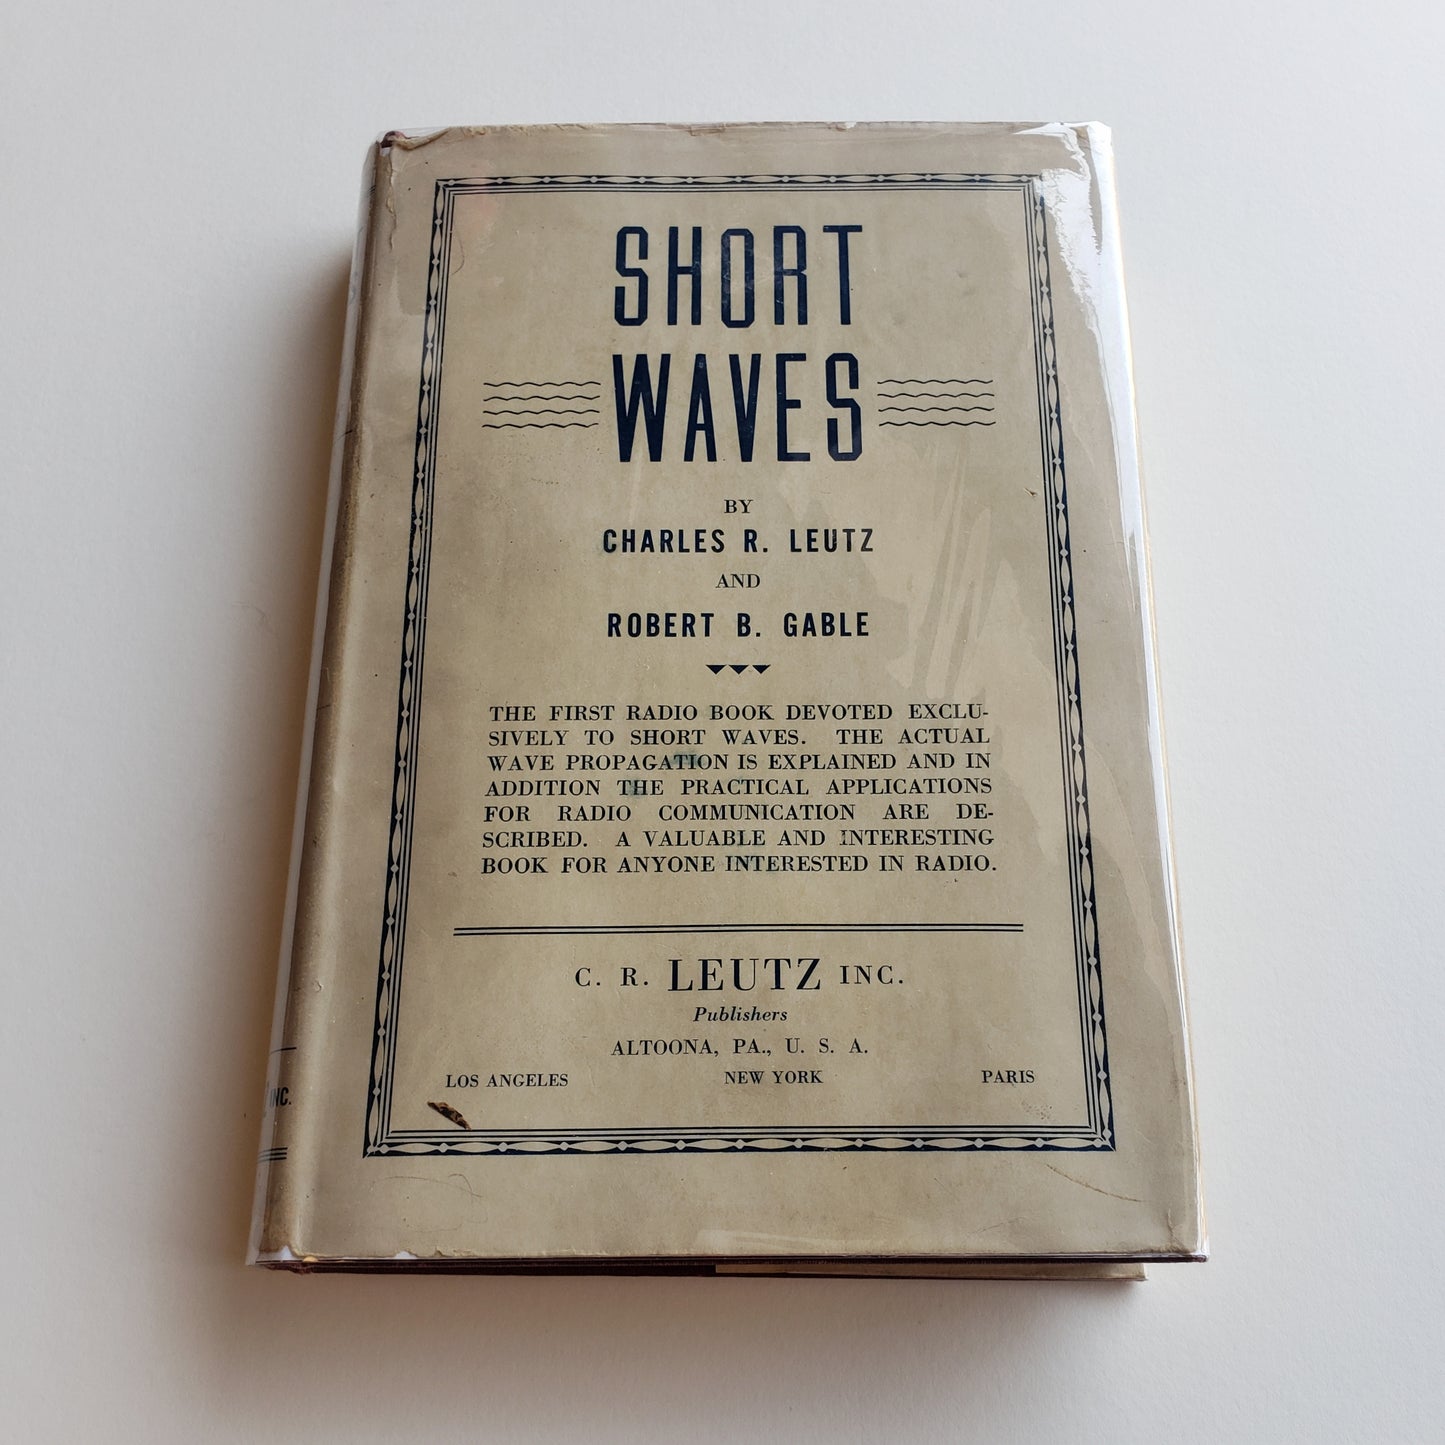 Vintage Book- Short Waves by Charles R. Leutz and Robert B. Gable (Science)